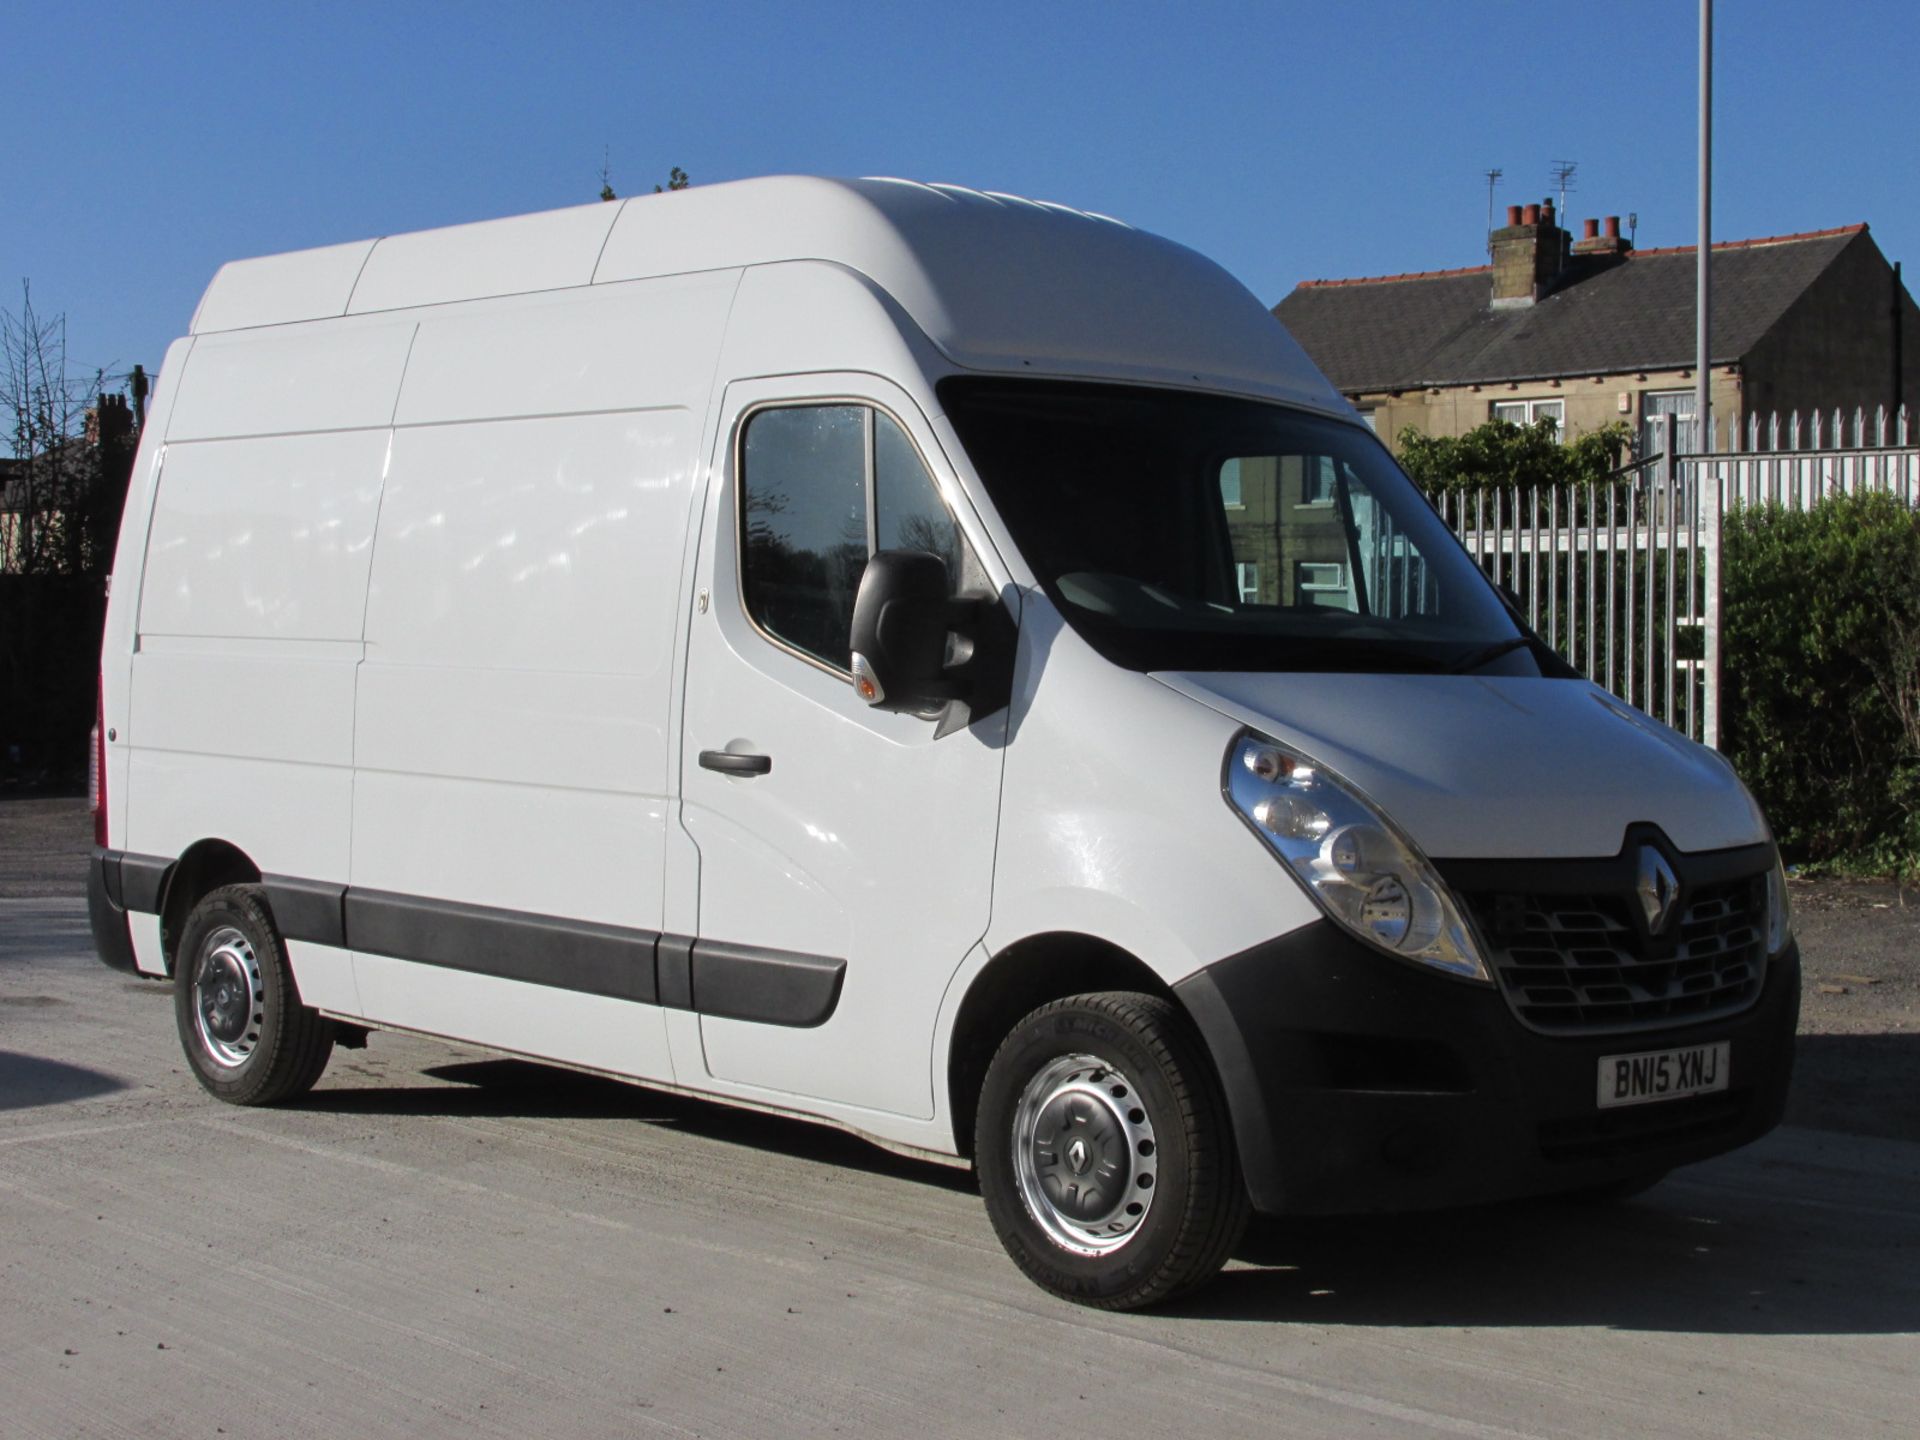 BN15 XNJ Renault Master MH35DCi 125High Roof - Image 10 of 39